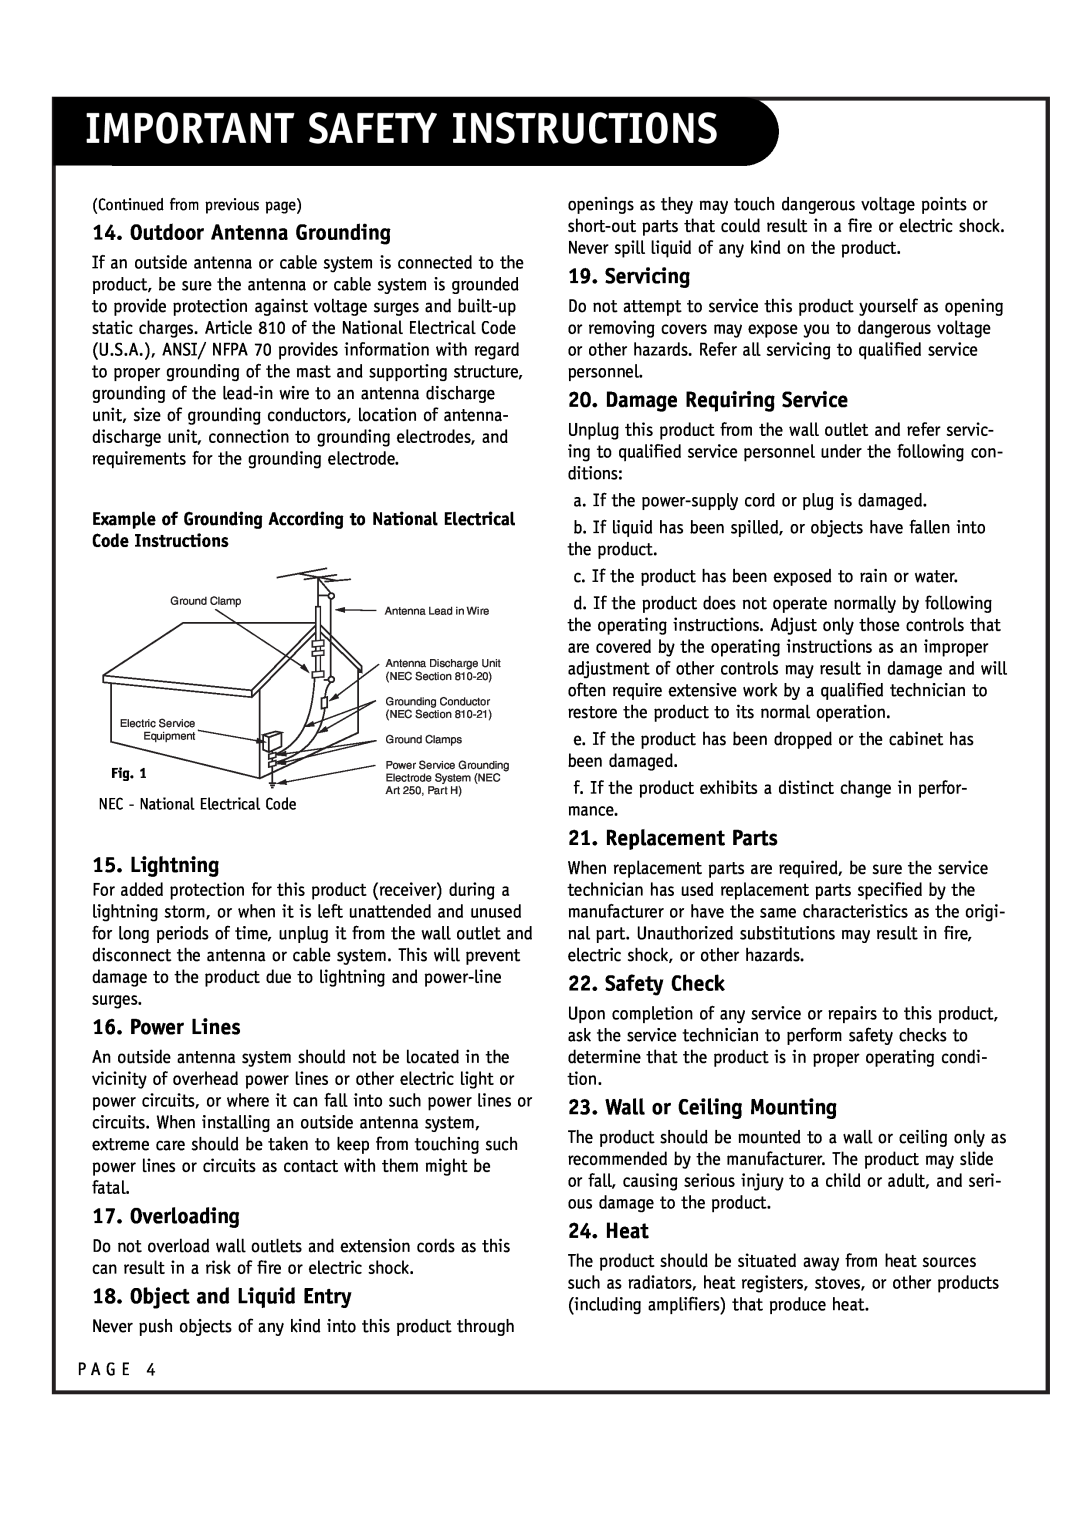 LG Electronics RU-48SZ40 owner manual Important Safety Instructions, Outdoor Antenna Grounding 